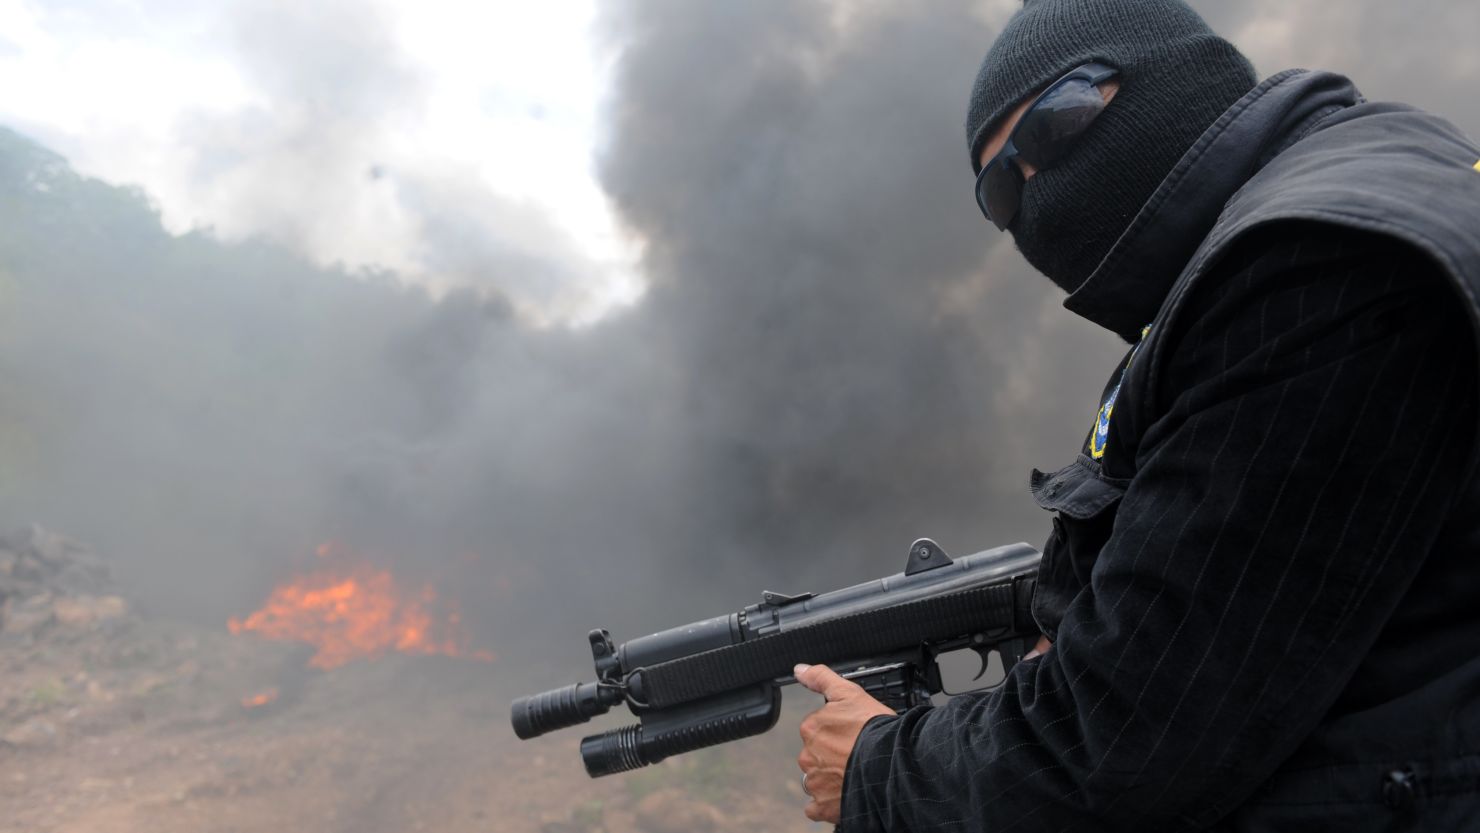 A policeman stands watch during the incineration of 456 kilos of cocaine on July 4 near Tegucigalpa, Honduras. 